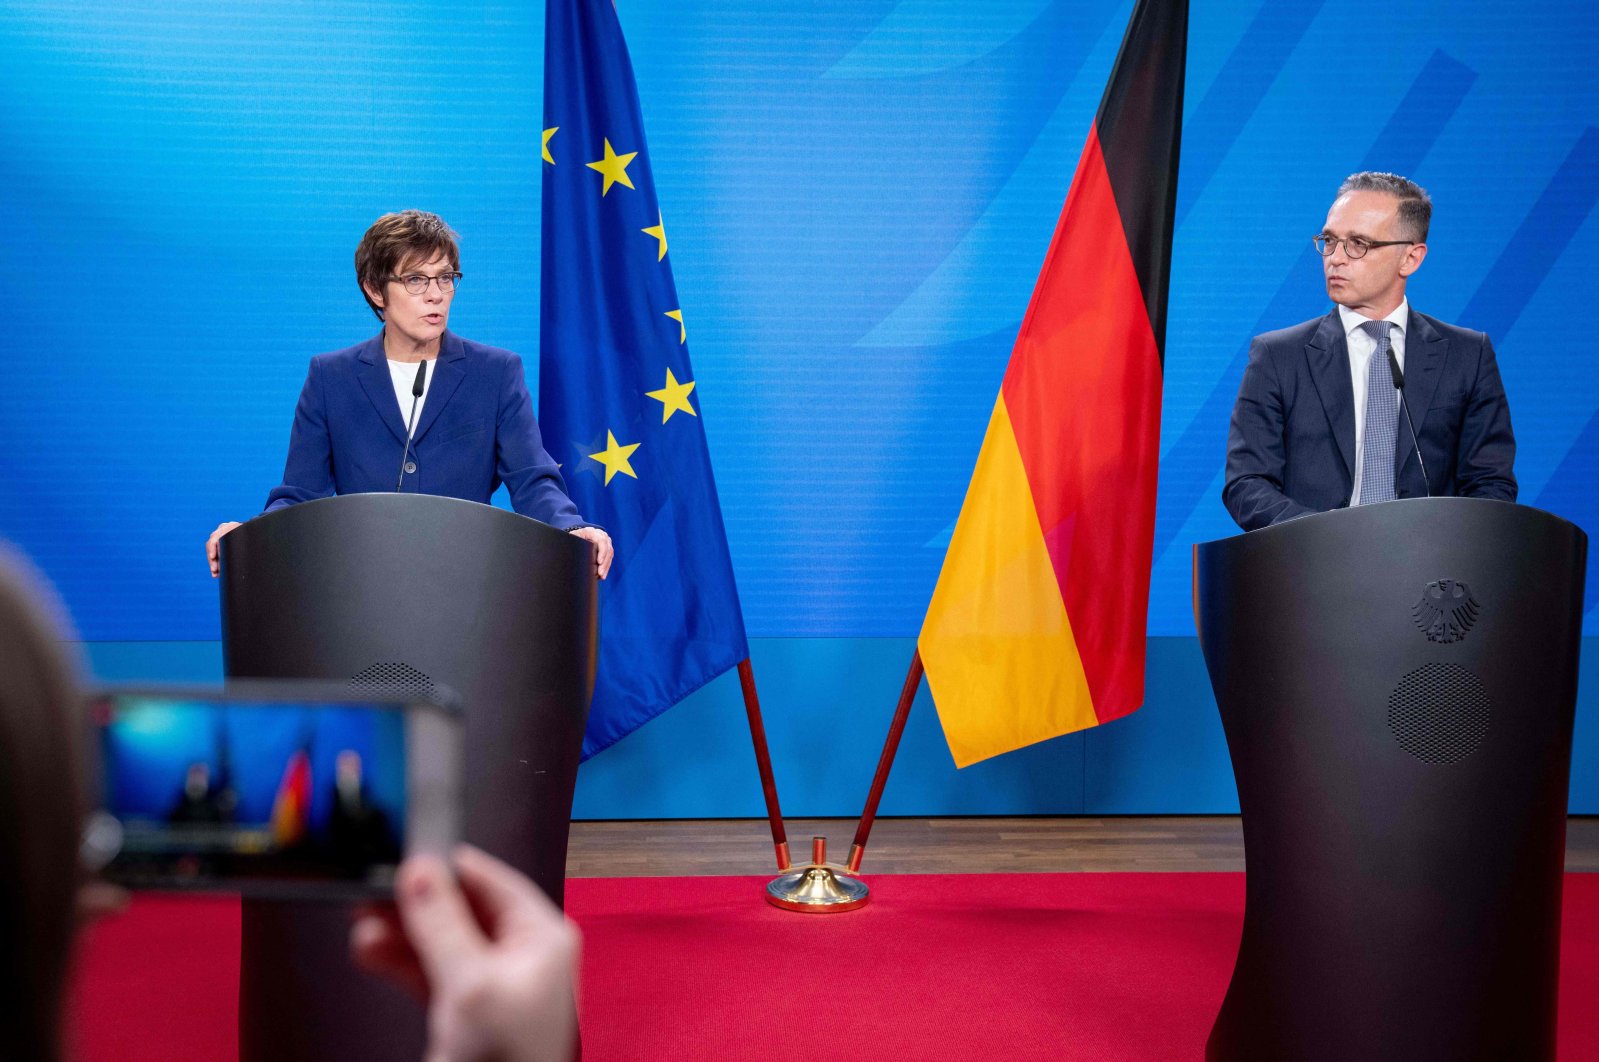 German Defense Minister Annegret Kramp-Karrenbauer (L) and German Foreign Minister Heiko Maas attend a joint press conference on evacuation measures at the airport in Kabul following the Taliban takeover of Afghanistan, in Berlin, on August 17, 2021 at the Foreign Ministry in Berlin. (AFP Photo)